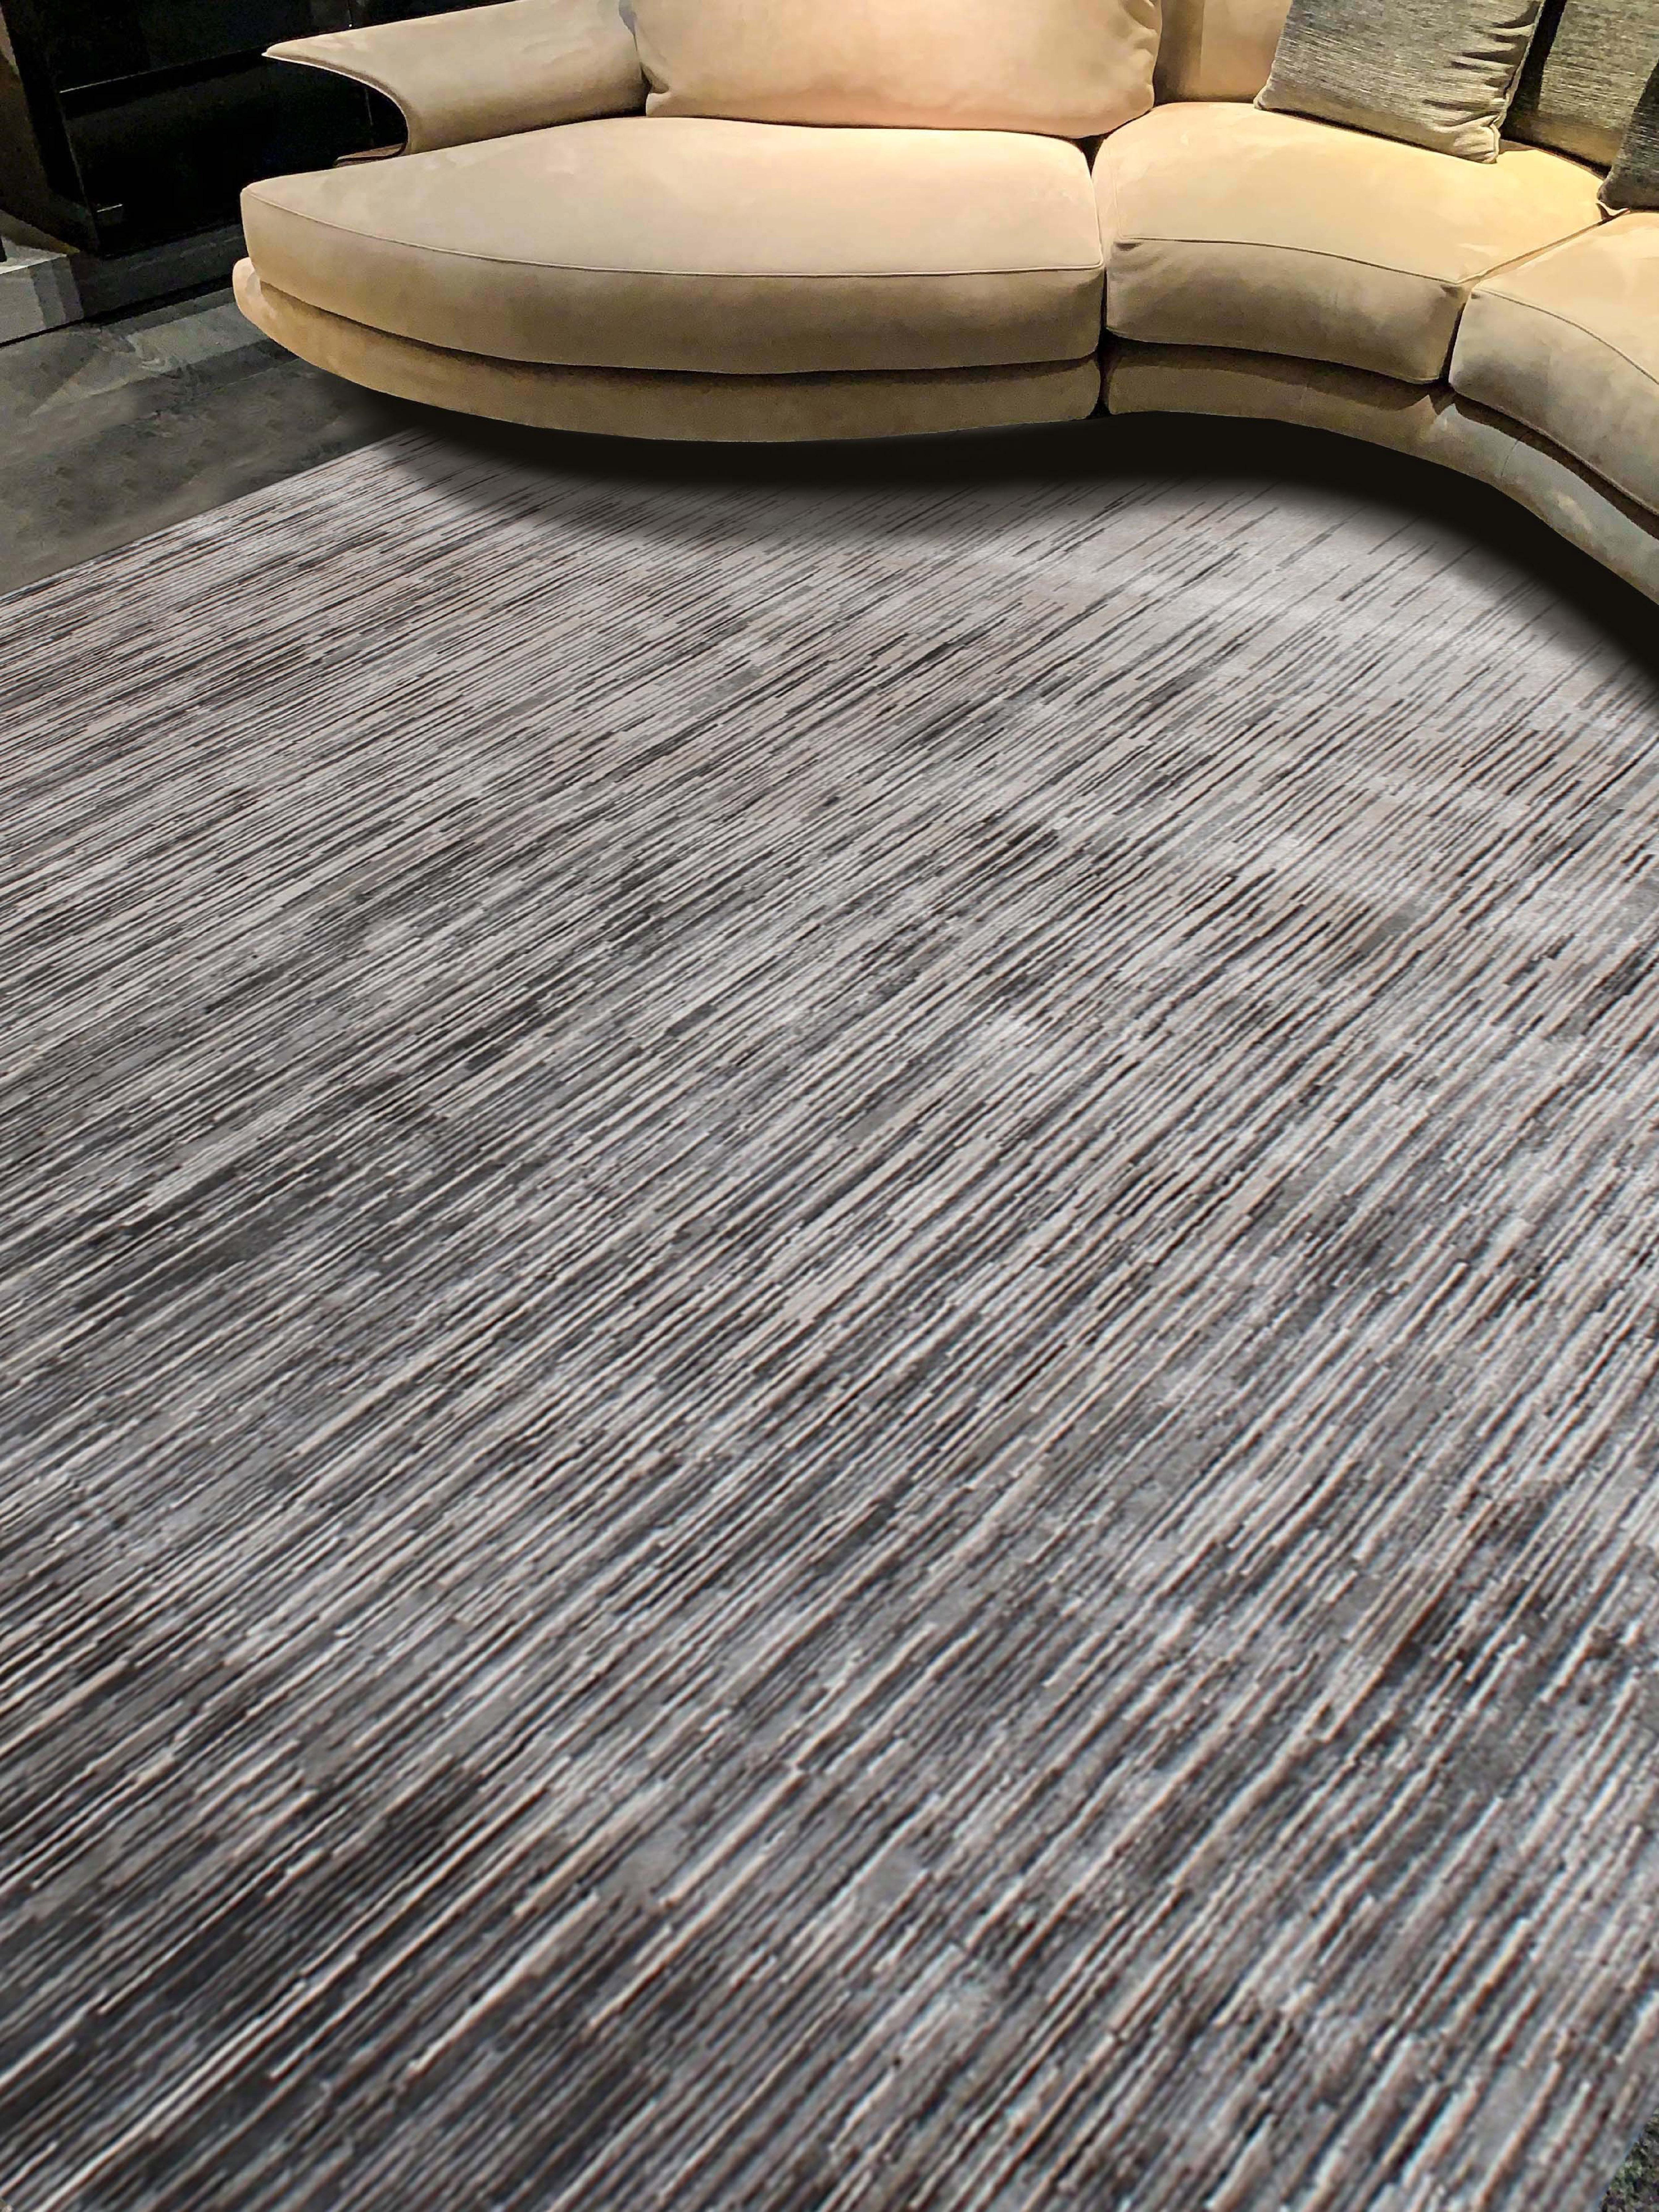 The ‘Urbane’ collection is the epitome of sophistication and refinement, best suited for your home. Every piece in this range of contemporary and modern carpets is a testimony to Hands’ unchanging quality and timeless designs.

Designed by Hands